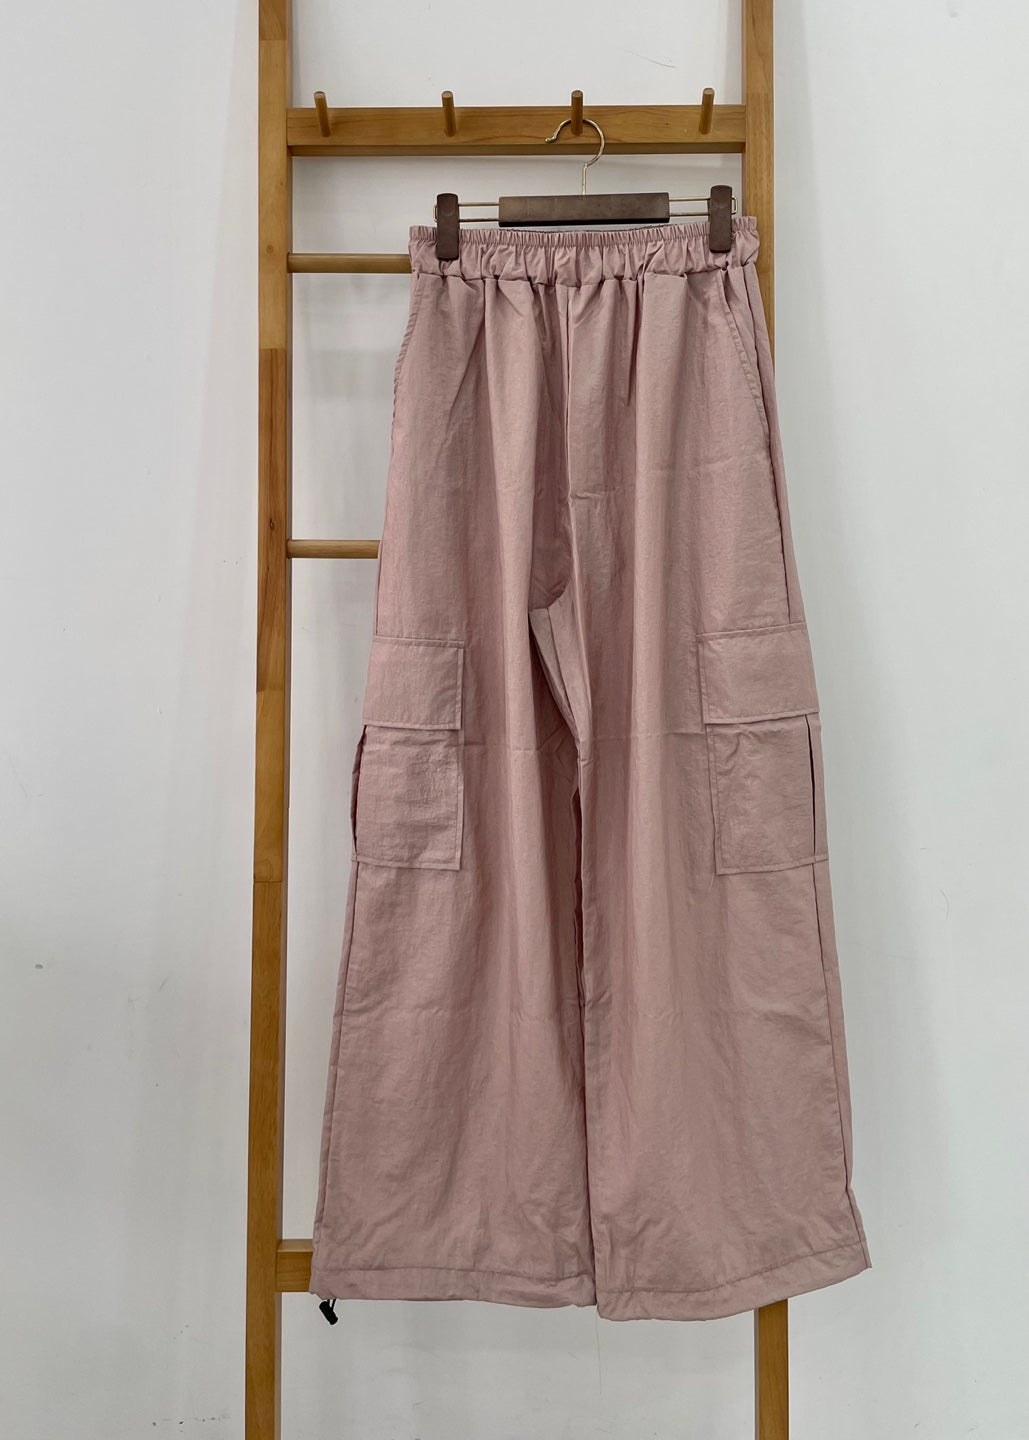 Relaxed-fit parachute pants